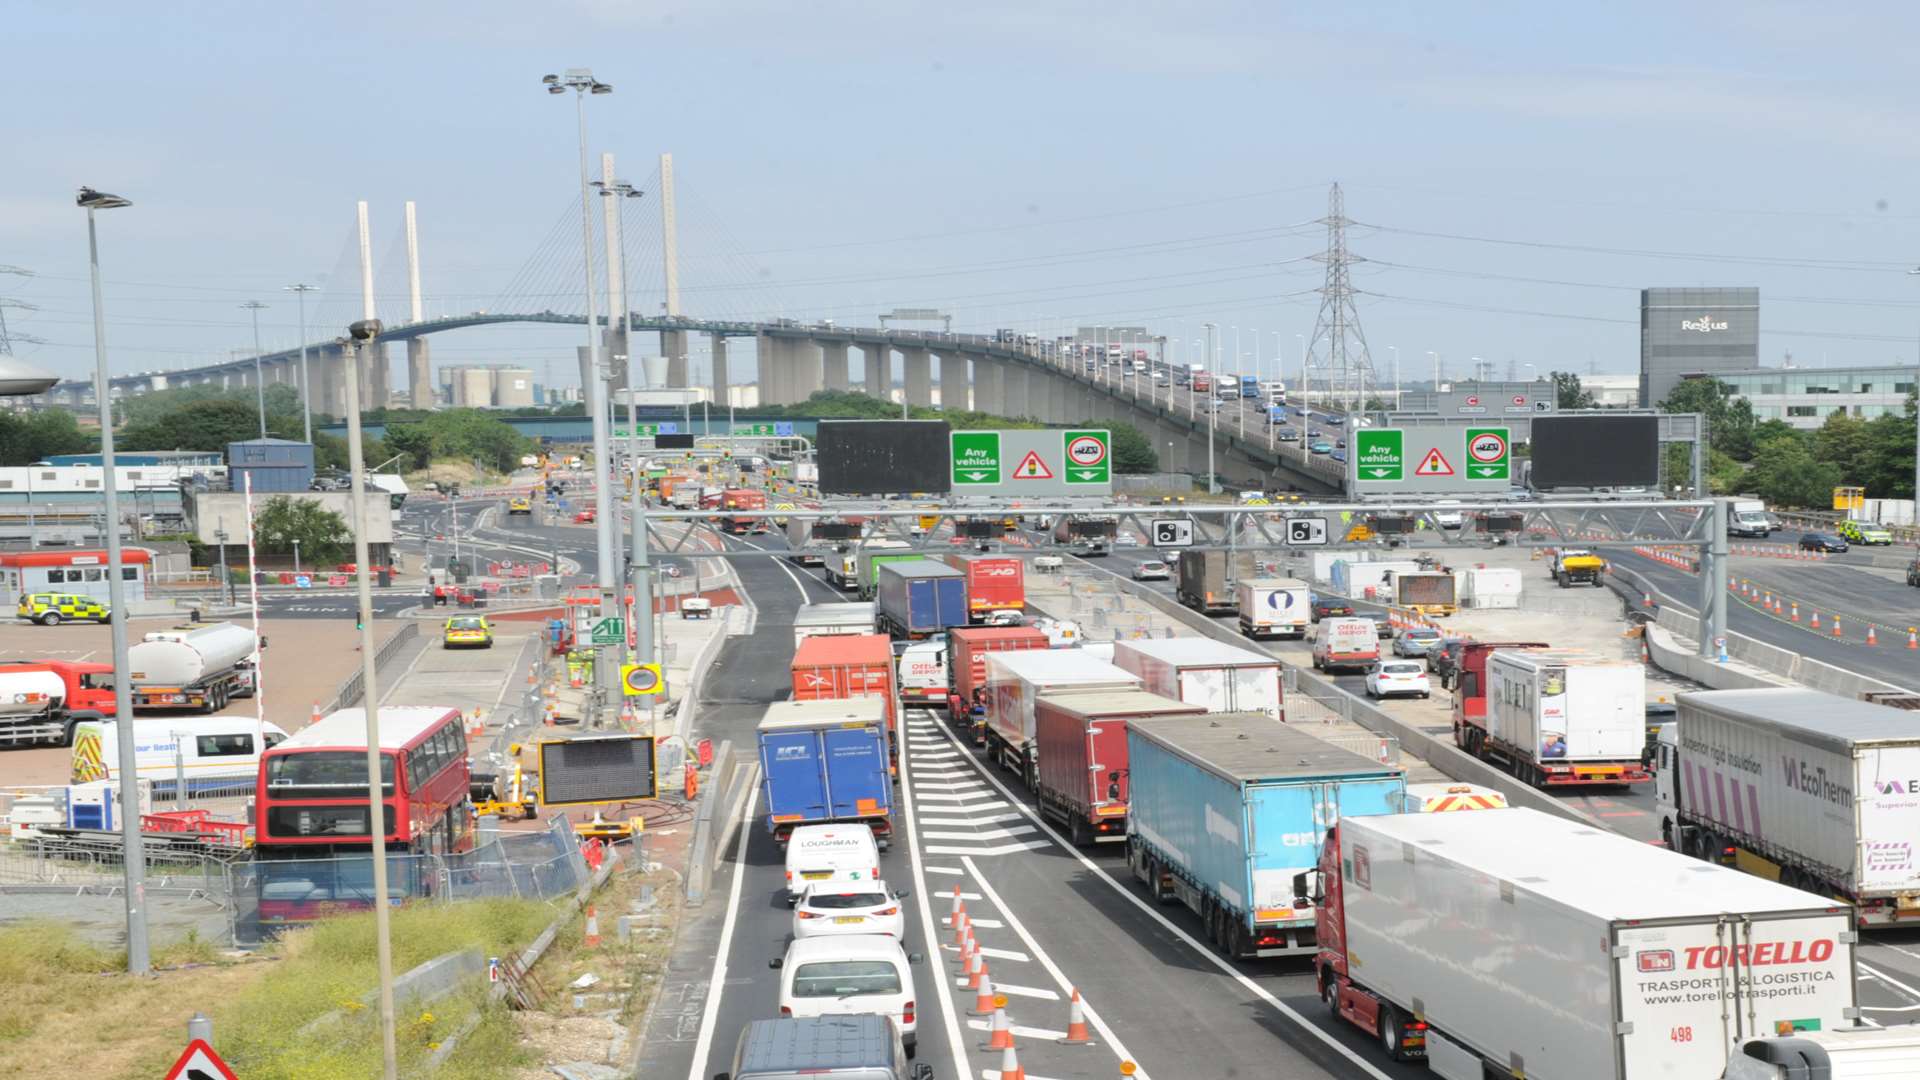 Queuing traffic for the Dartford crossing